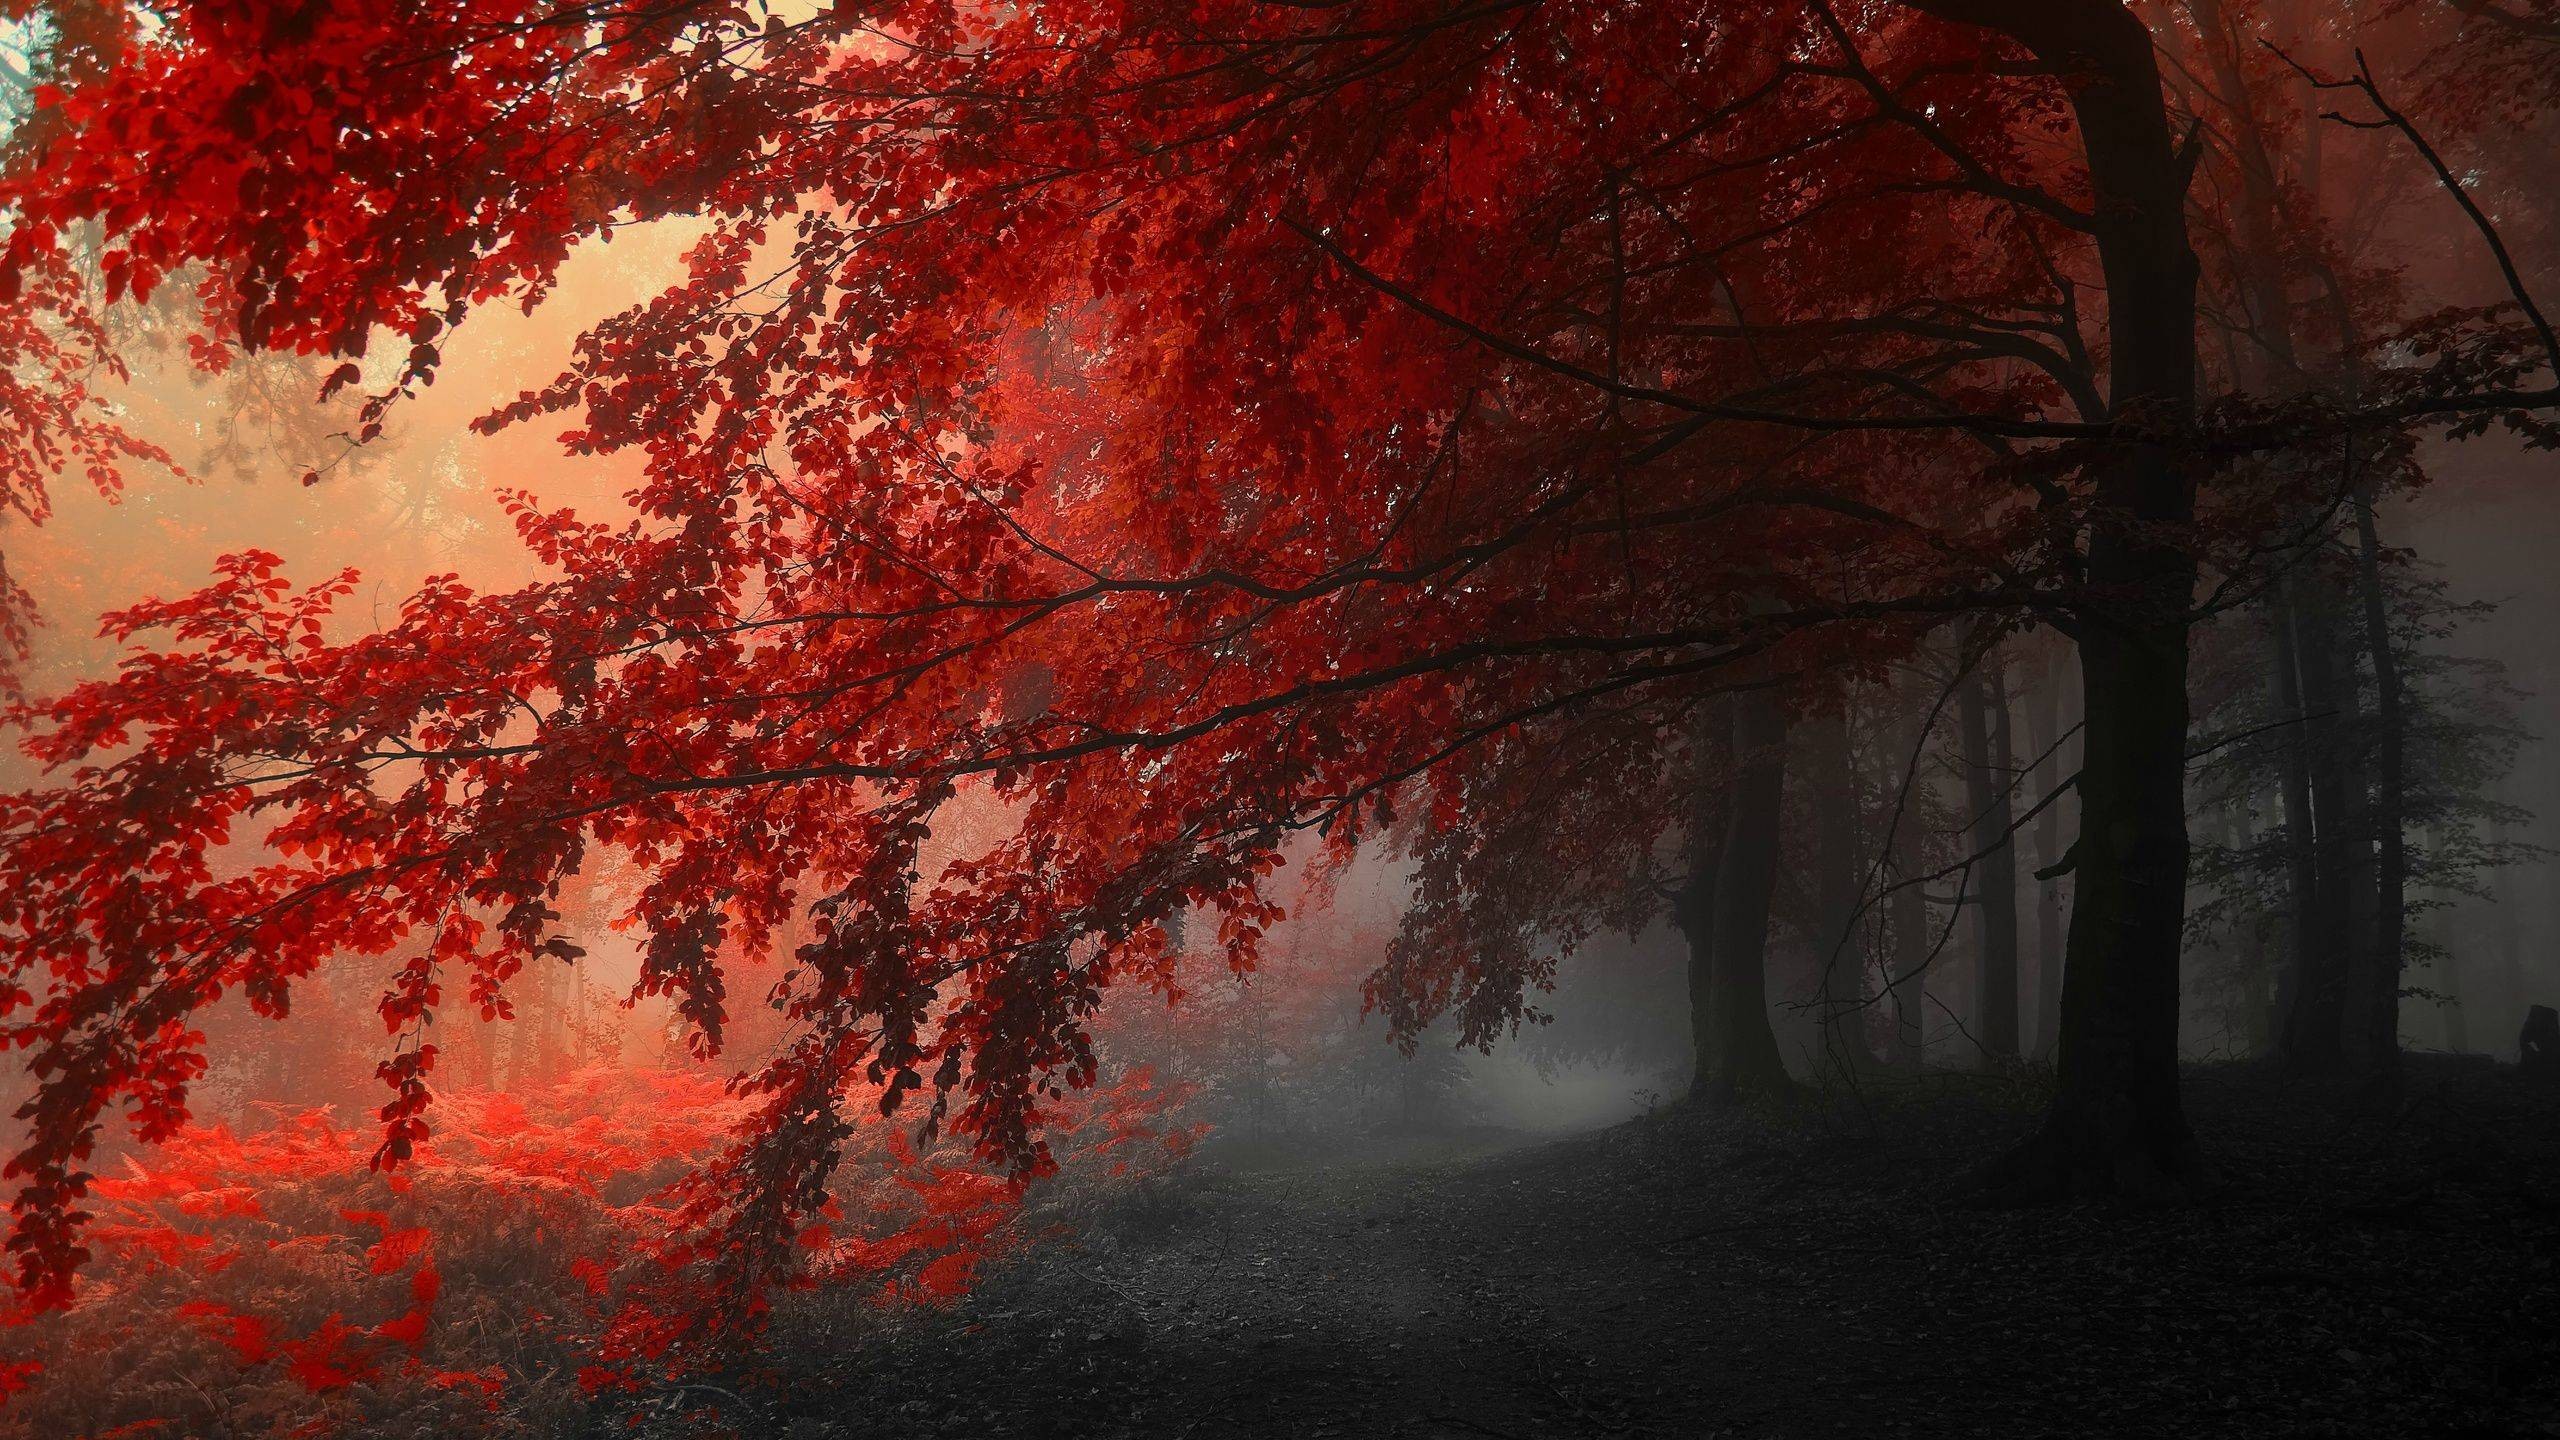 General 2560x1440 fall trees nature outdoors plants mist